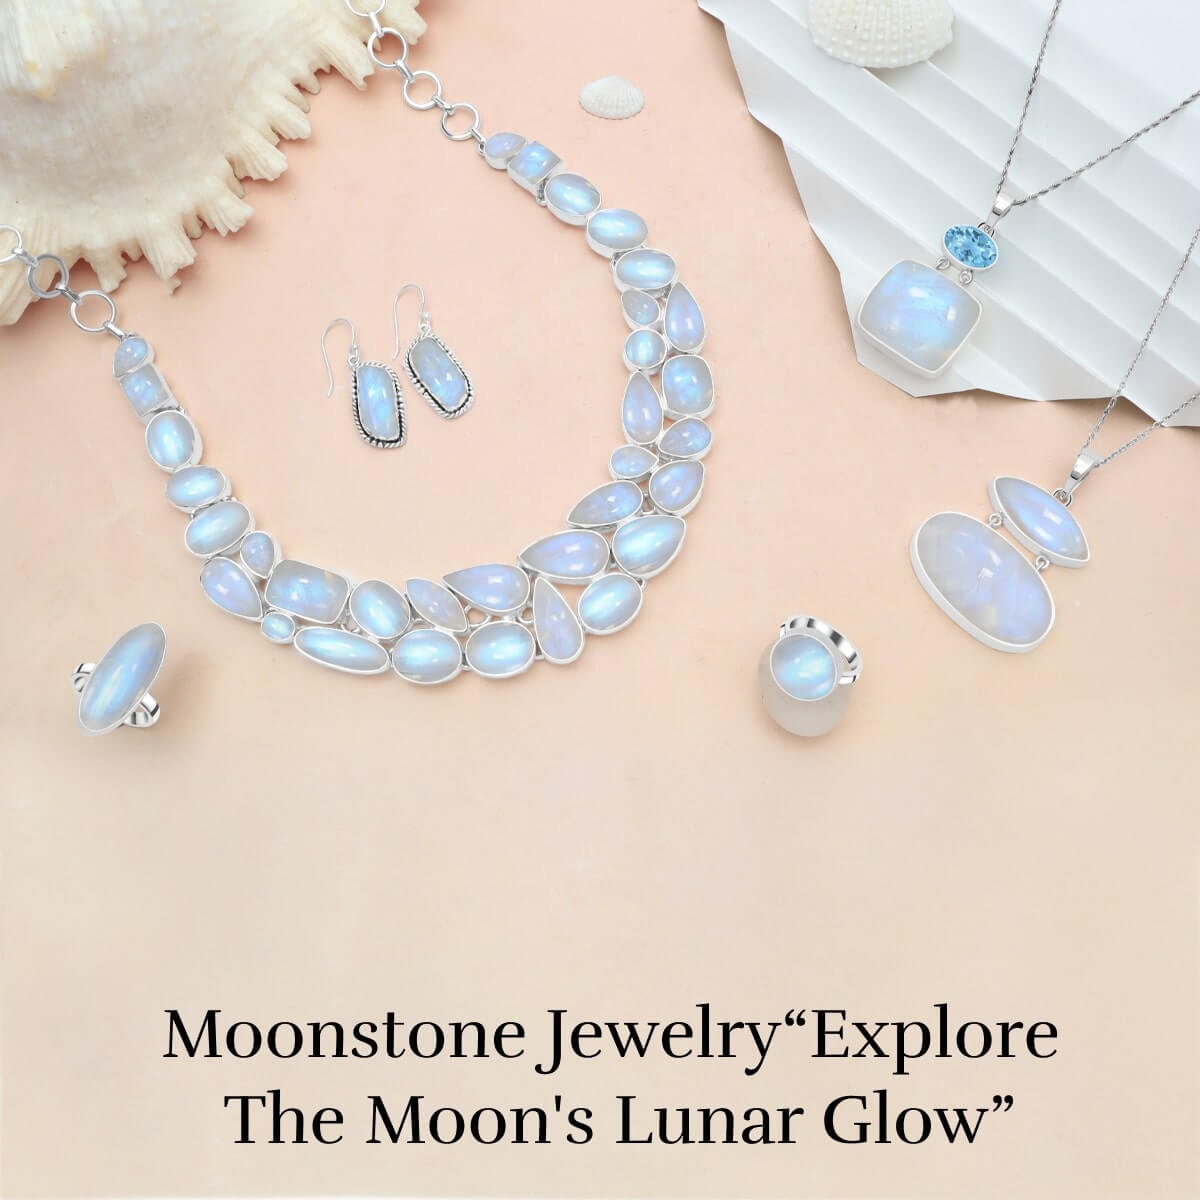 What is Moonstone